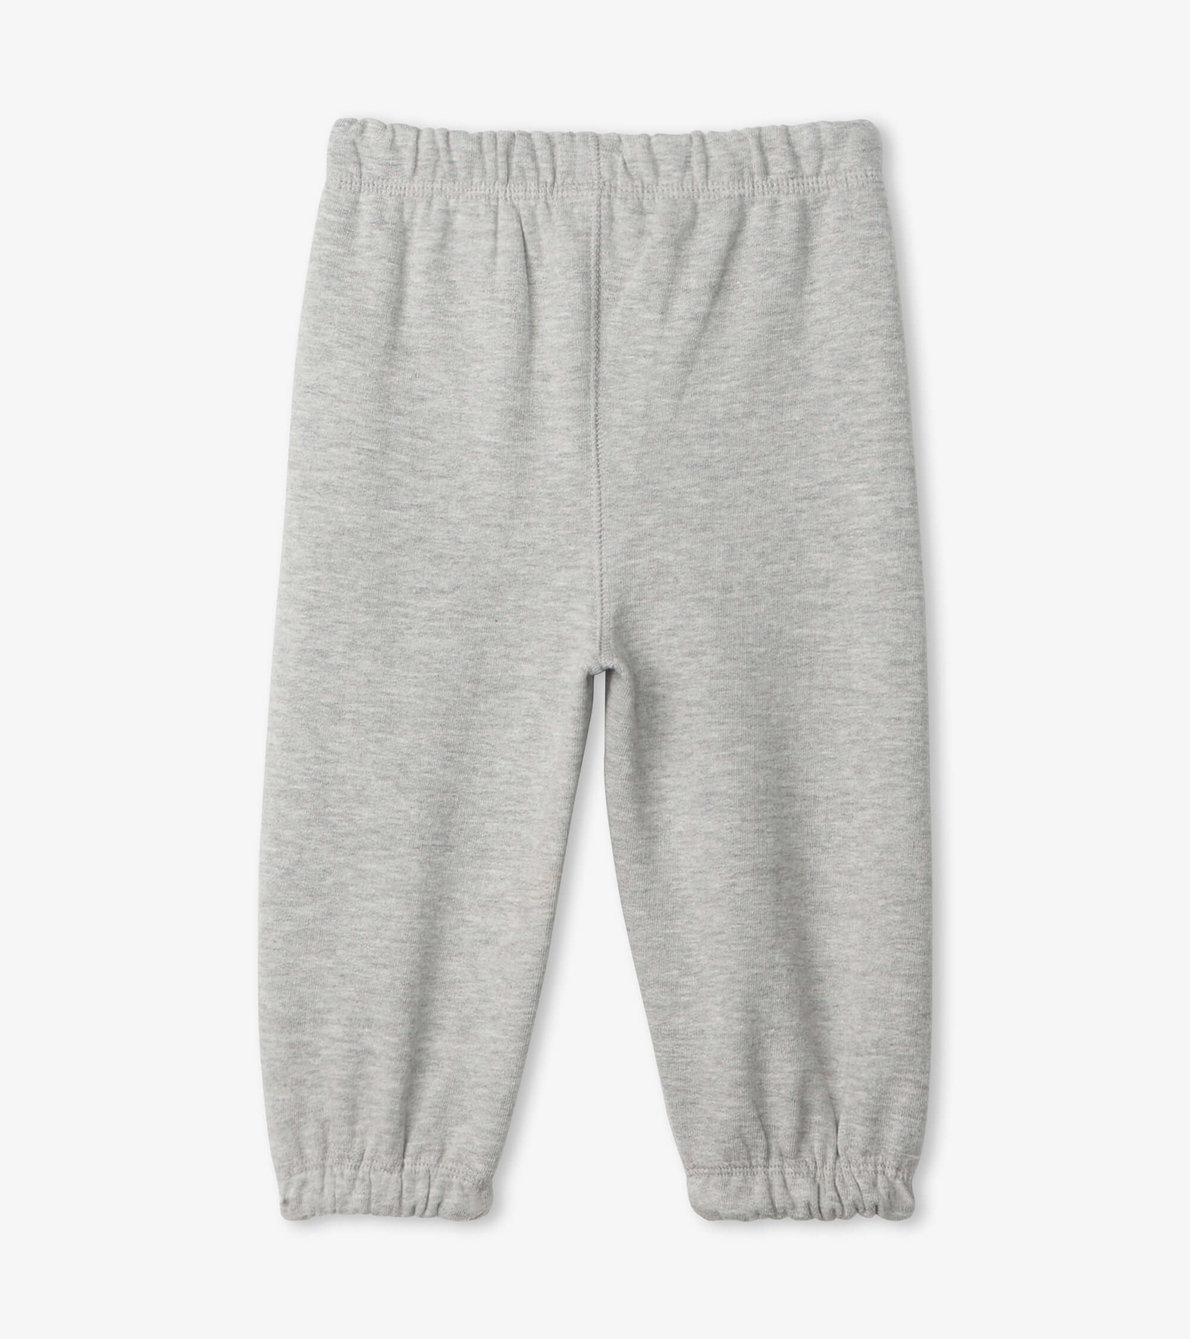 View larger image of Grey French Terry Baby Joggers